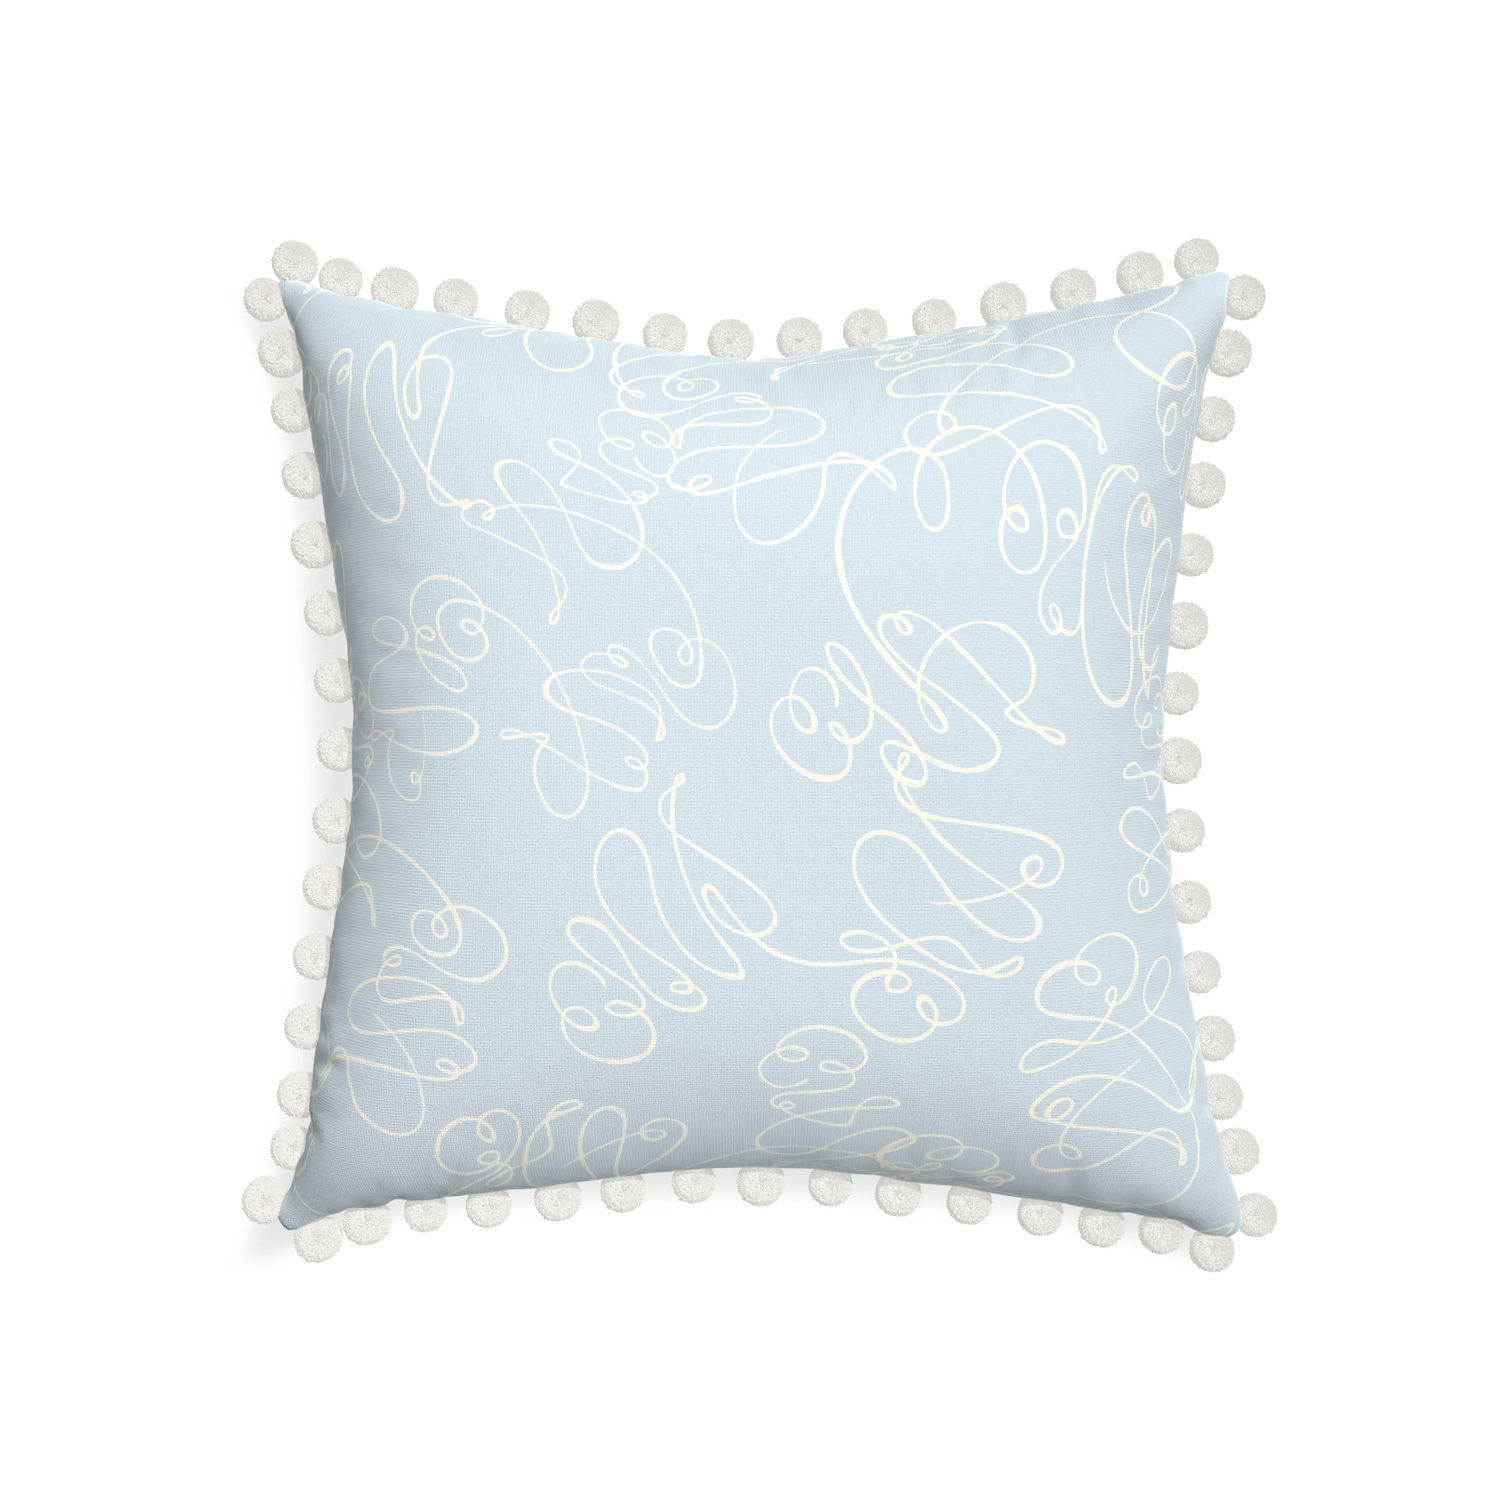 22-square mirabella custom powder blue abstractpillow with snow pom pom on white background